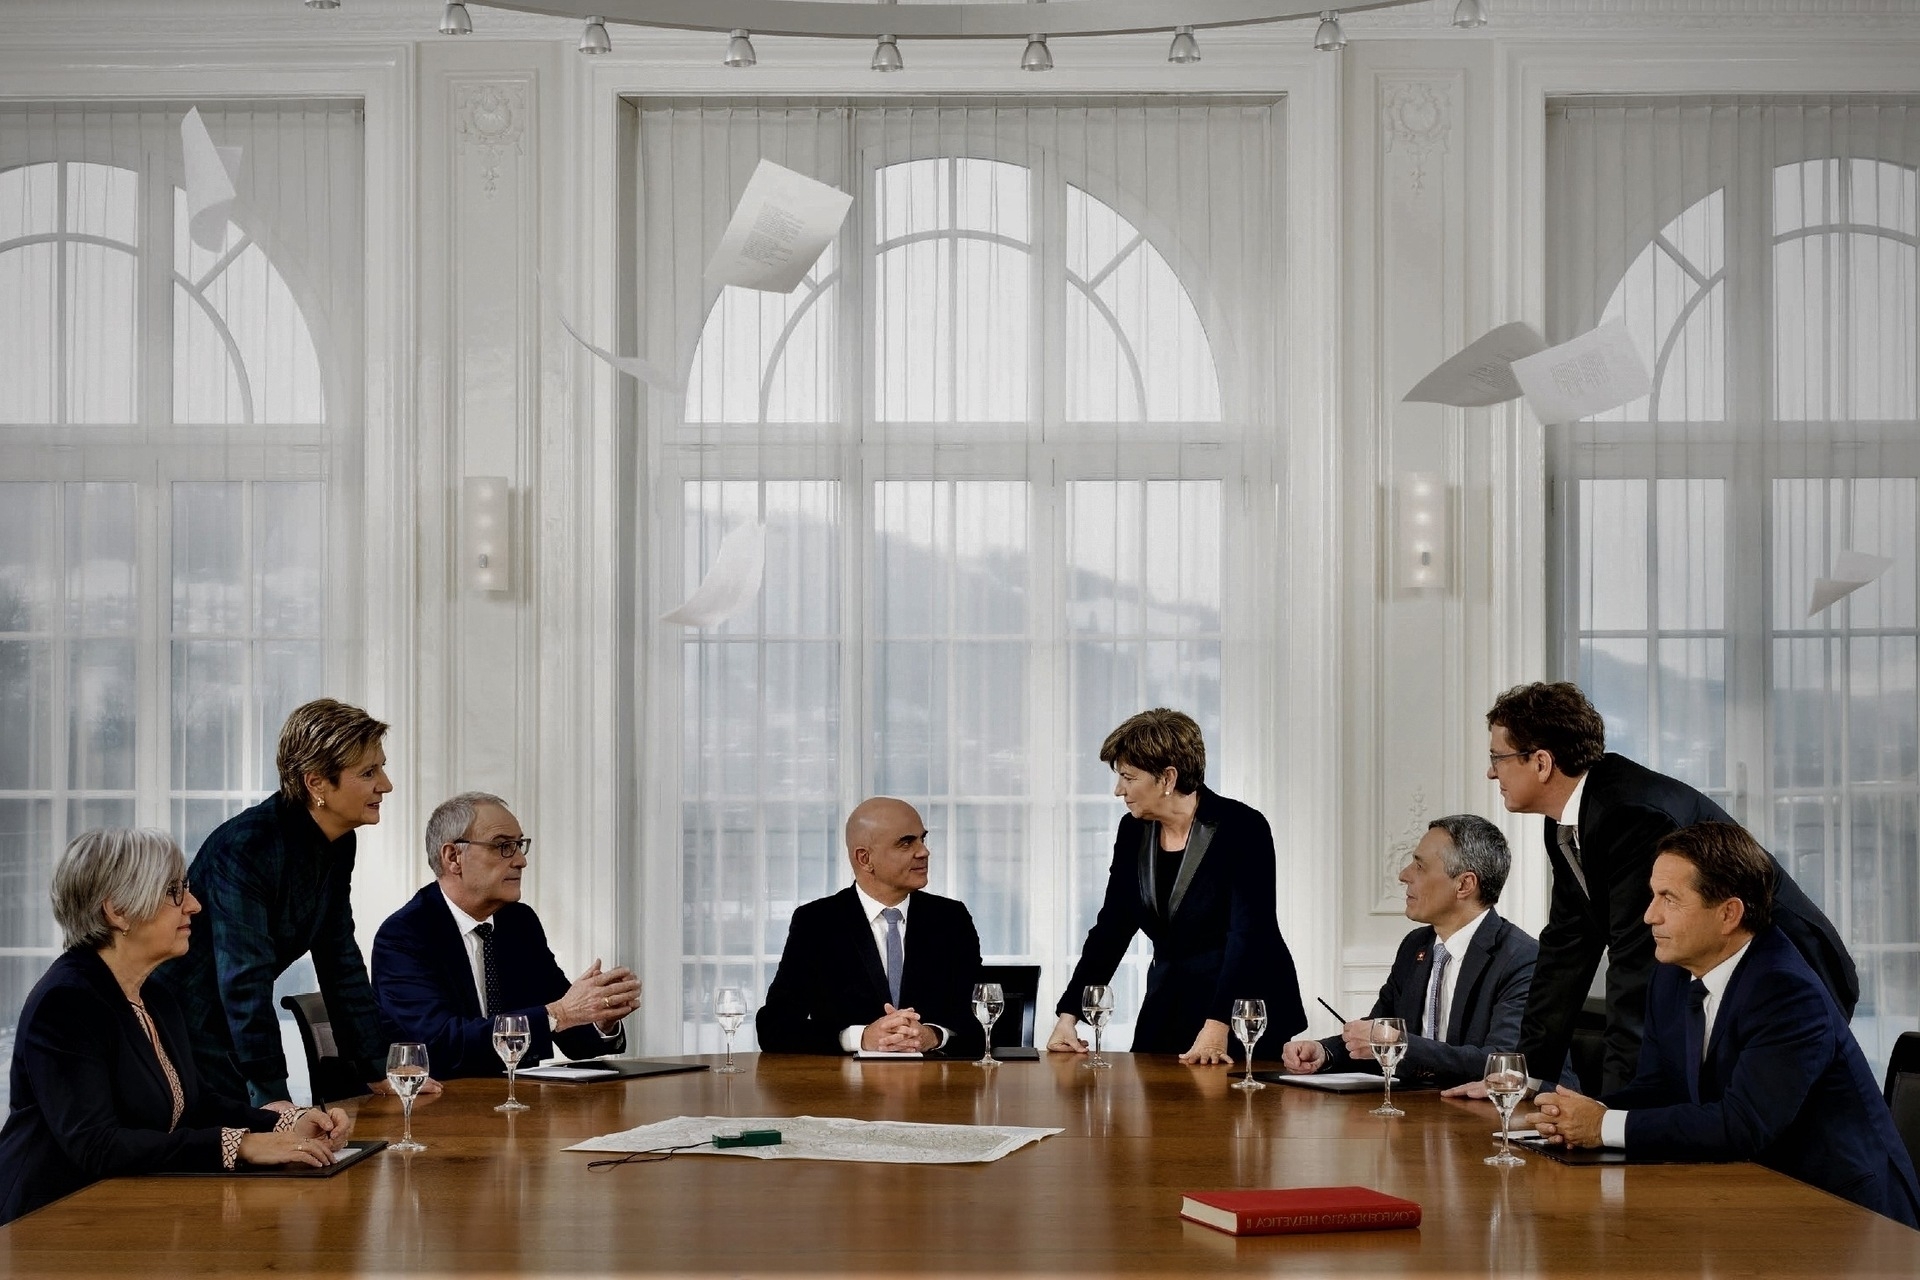 Switzerland: the official 2023 photograph in reverse version of the Federal Council of the Swiss Confederation: from left to right, the Federal Councilors Elisabeth Baume-Schndeider, Karin Keller-Sutter, Guy Parmelin, Alain Berset (President), Viola Amherd (Vice President), Ignazio Cassis, Albert Rösti and Federal Chancellor Walter Thurnherr